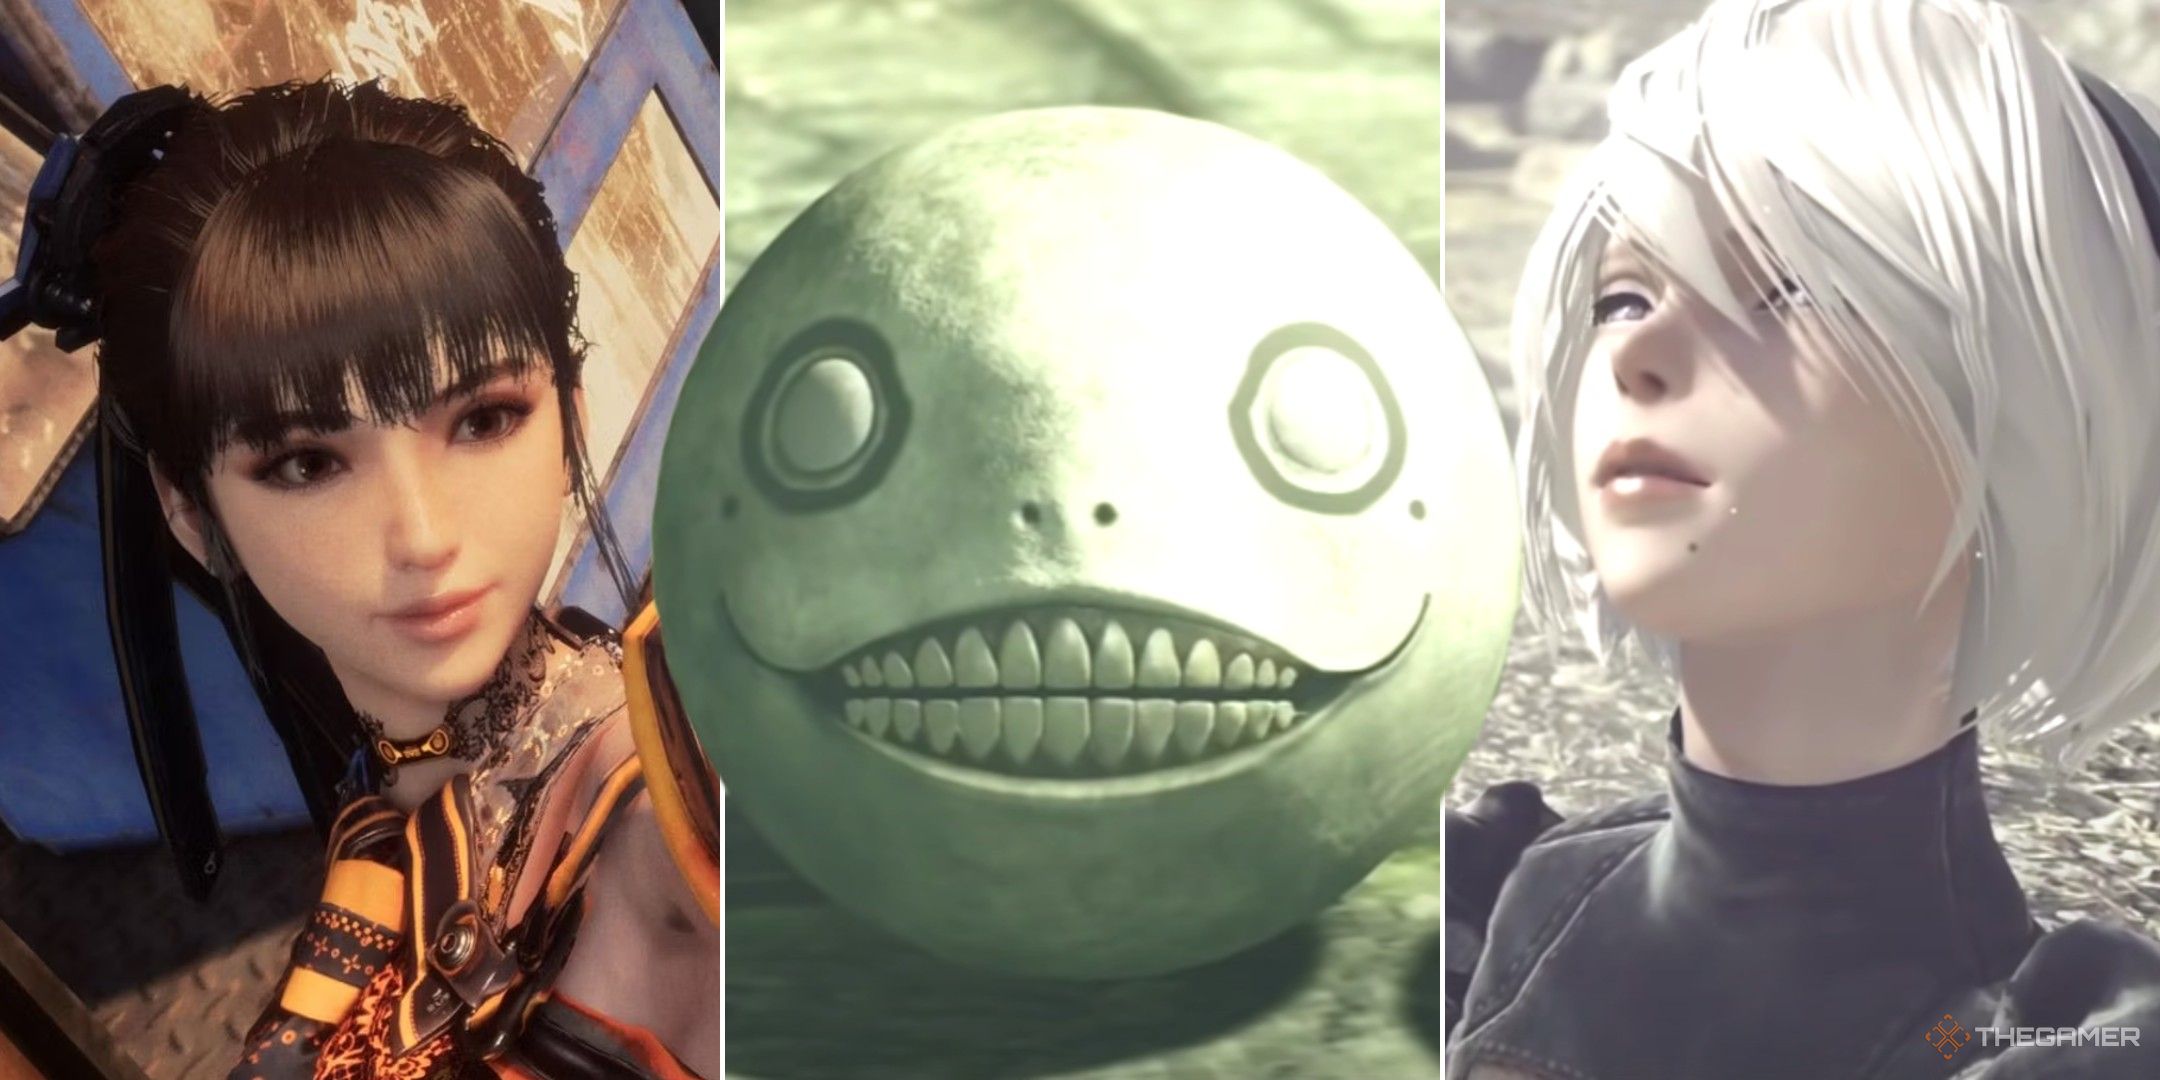 Collague showing EVE from stellar blade, and emil and 2b from nier automata